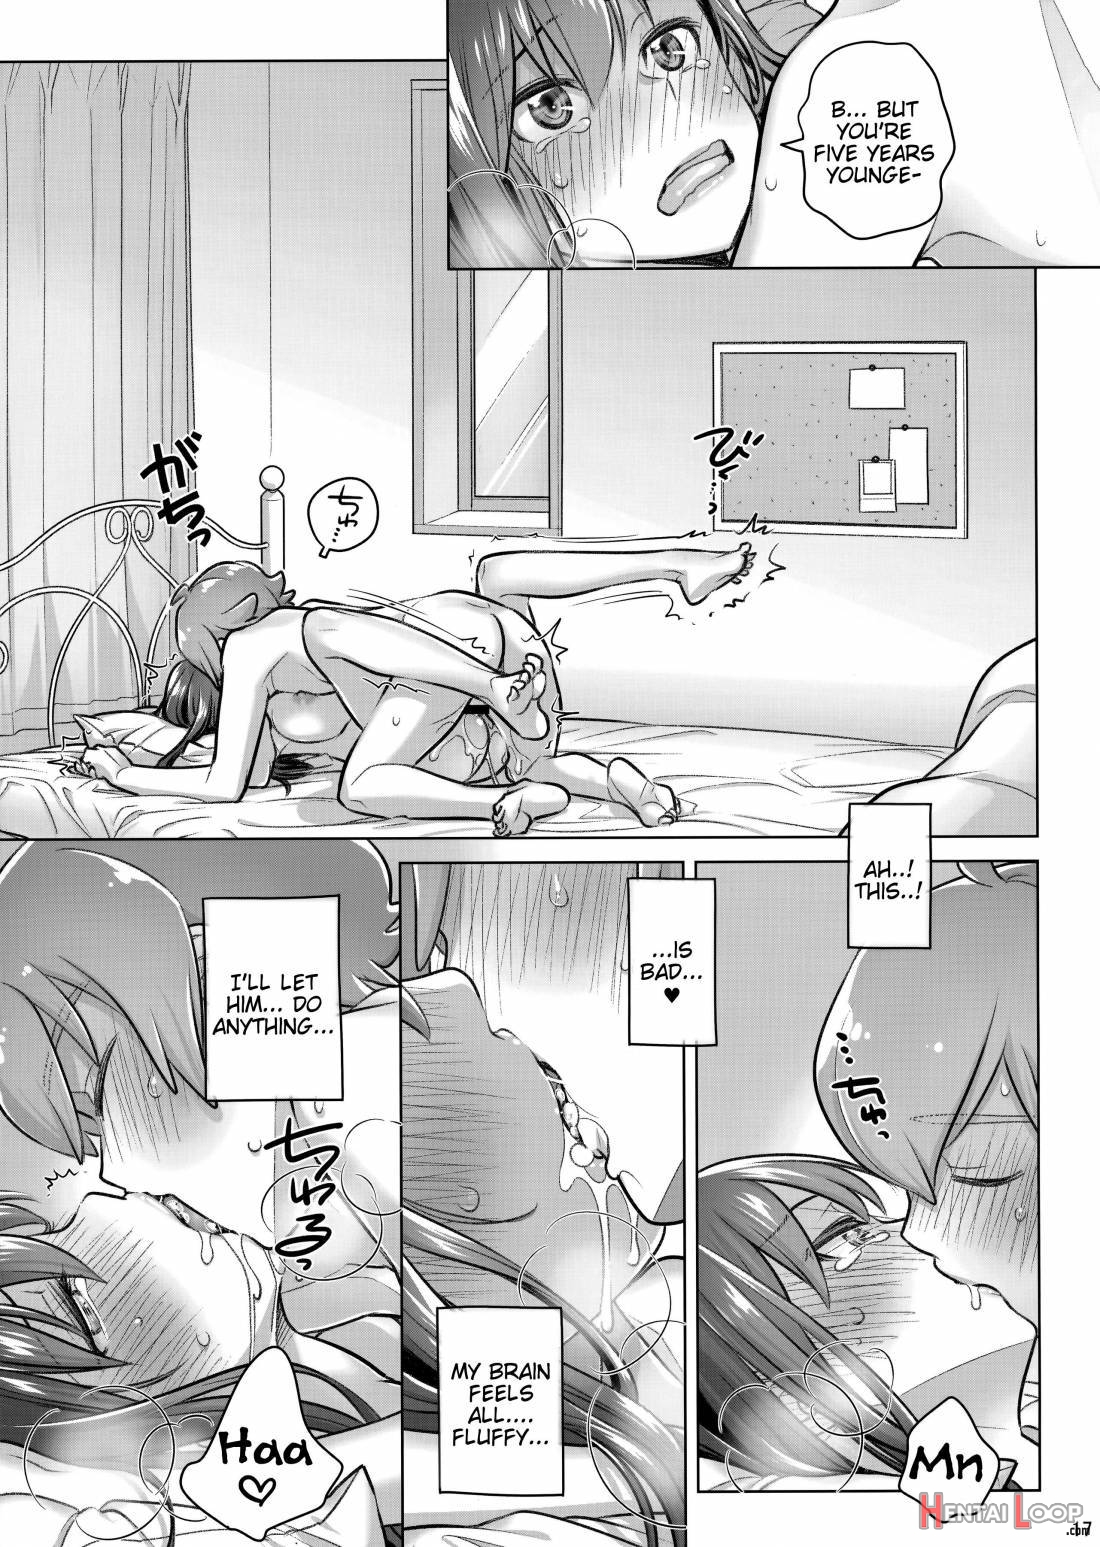 Read Stay by Me Period (by Ootsuka Mahiro) - Hentai doujinshi for free at  HentaiLoop